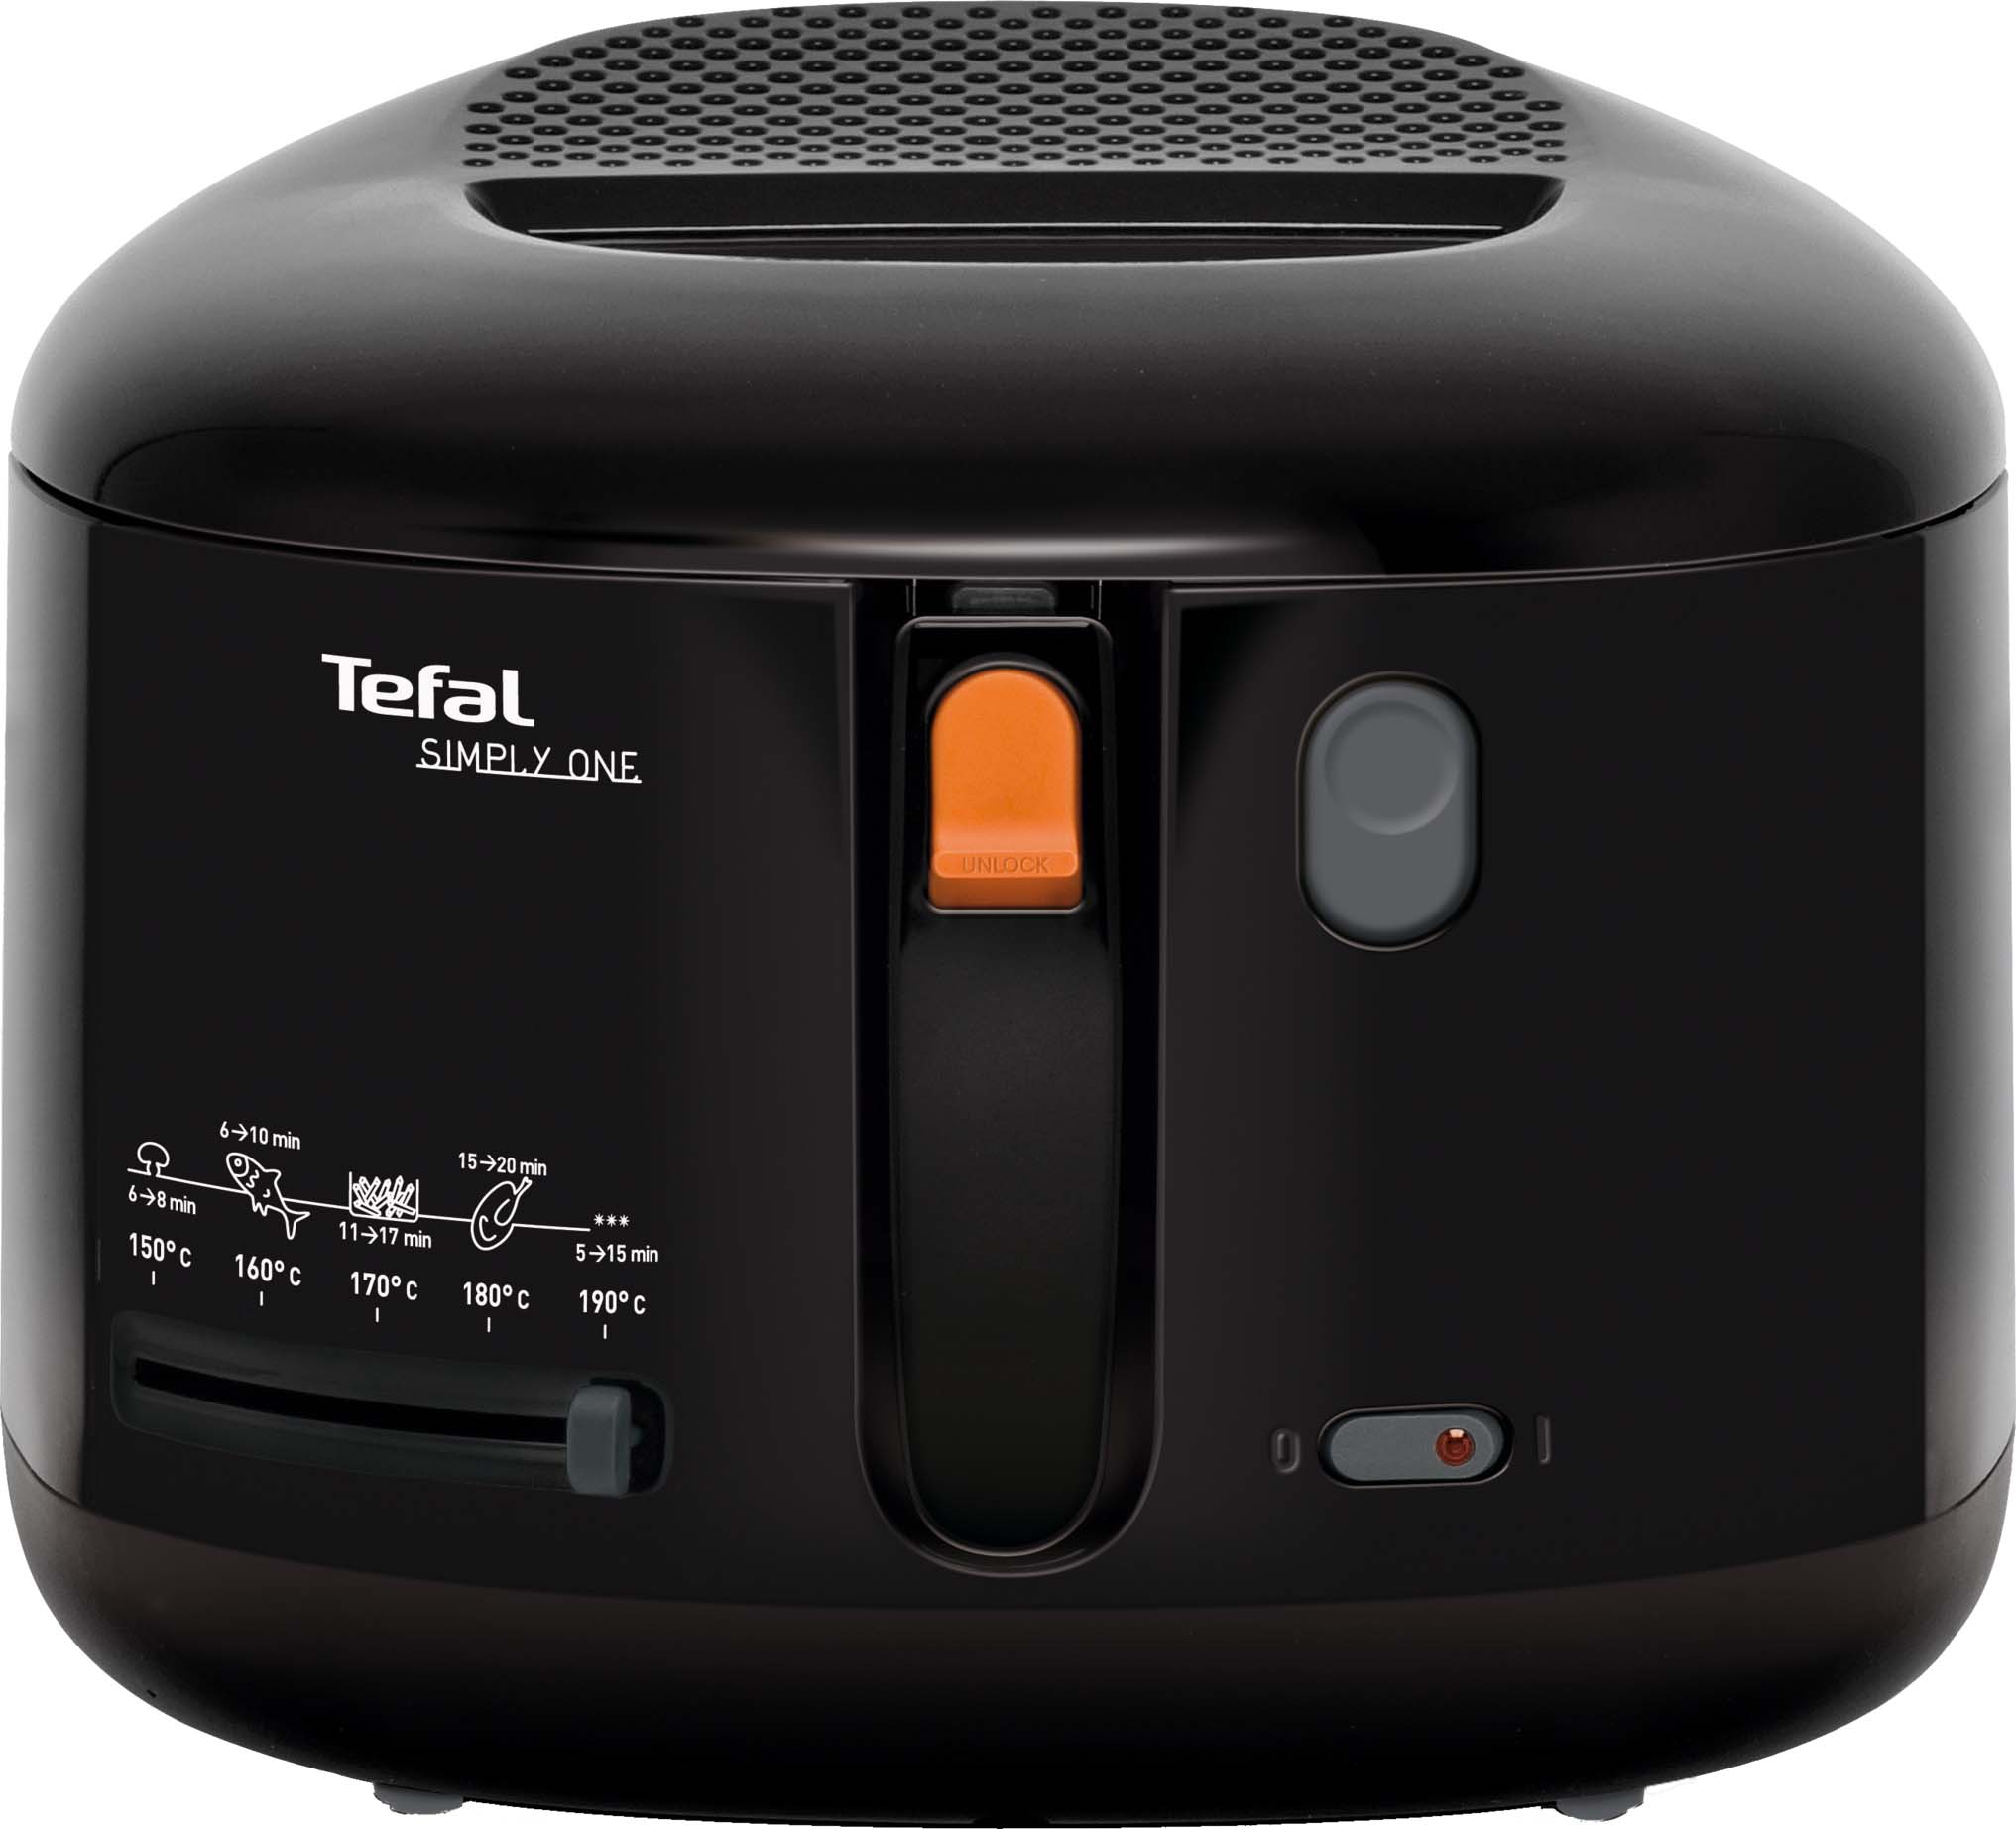 Tefal Fritteuse Simple One FF1608 sw